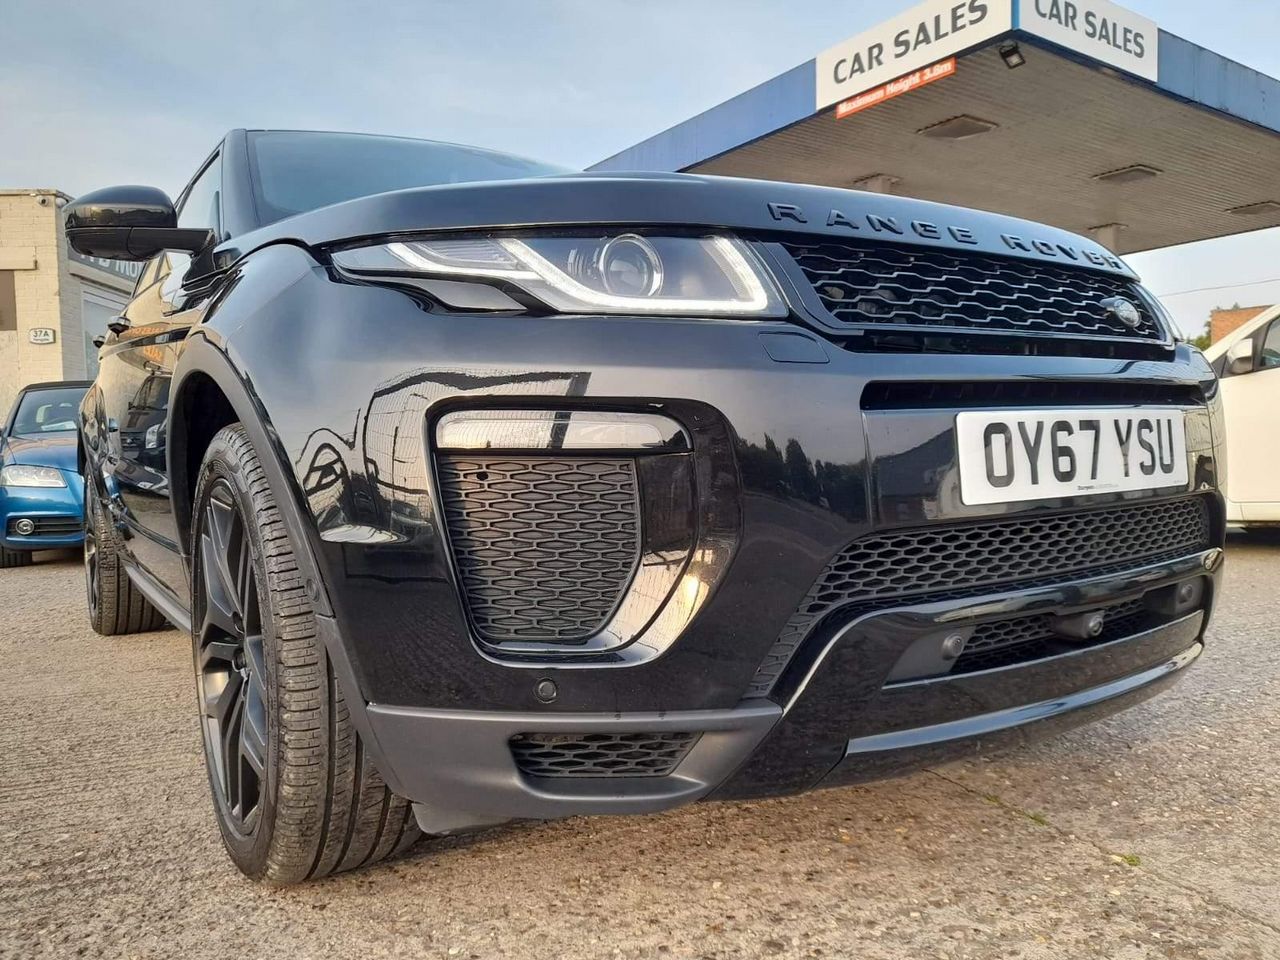 2017 Land Rover Range Rover Evoque 2.0 TD4 HSE Dynamic Auto 4WD Euro 6 (s/s) 5dr - Picture 2 of 53